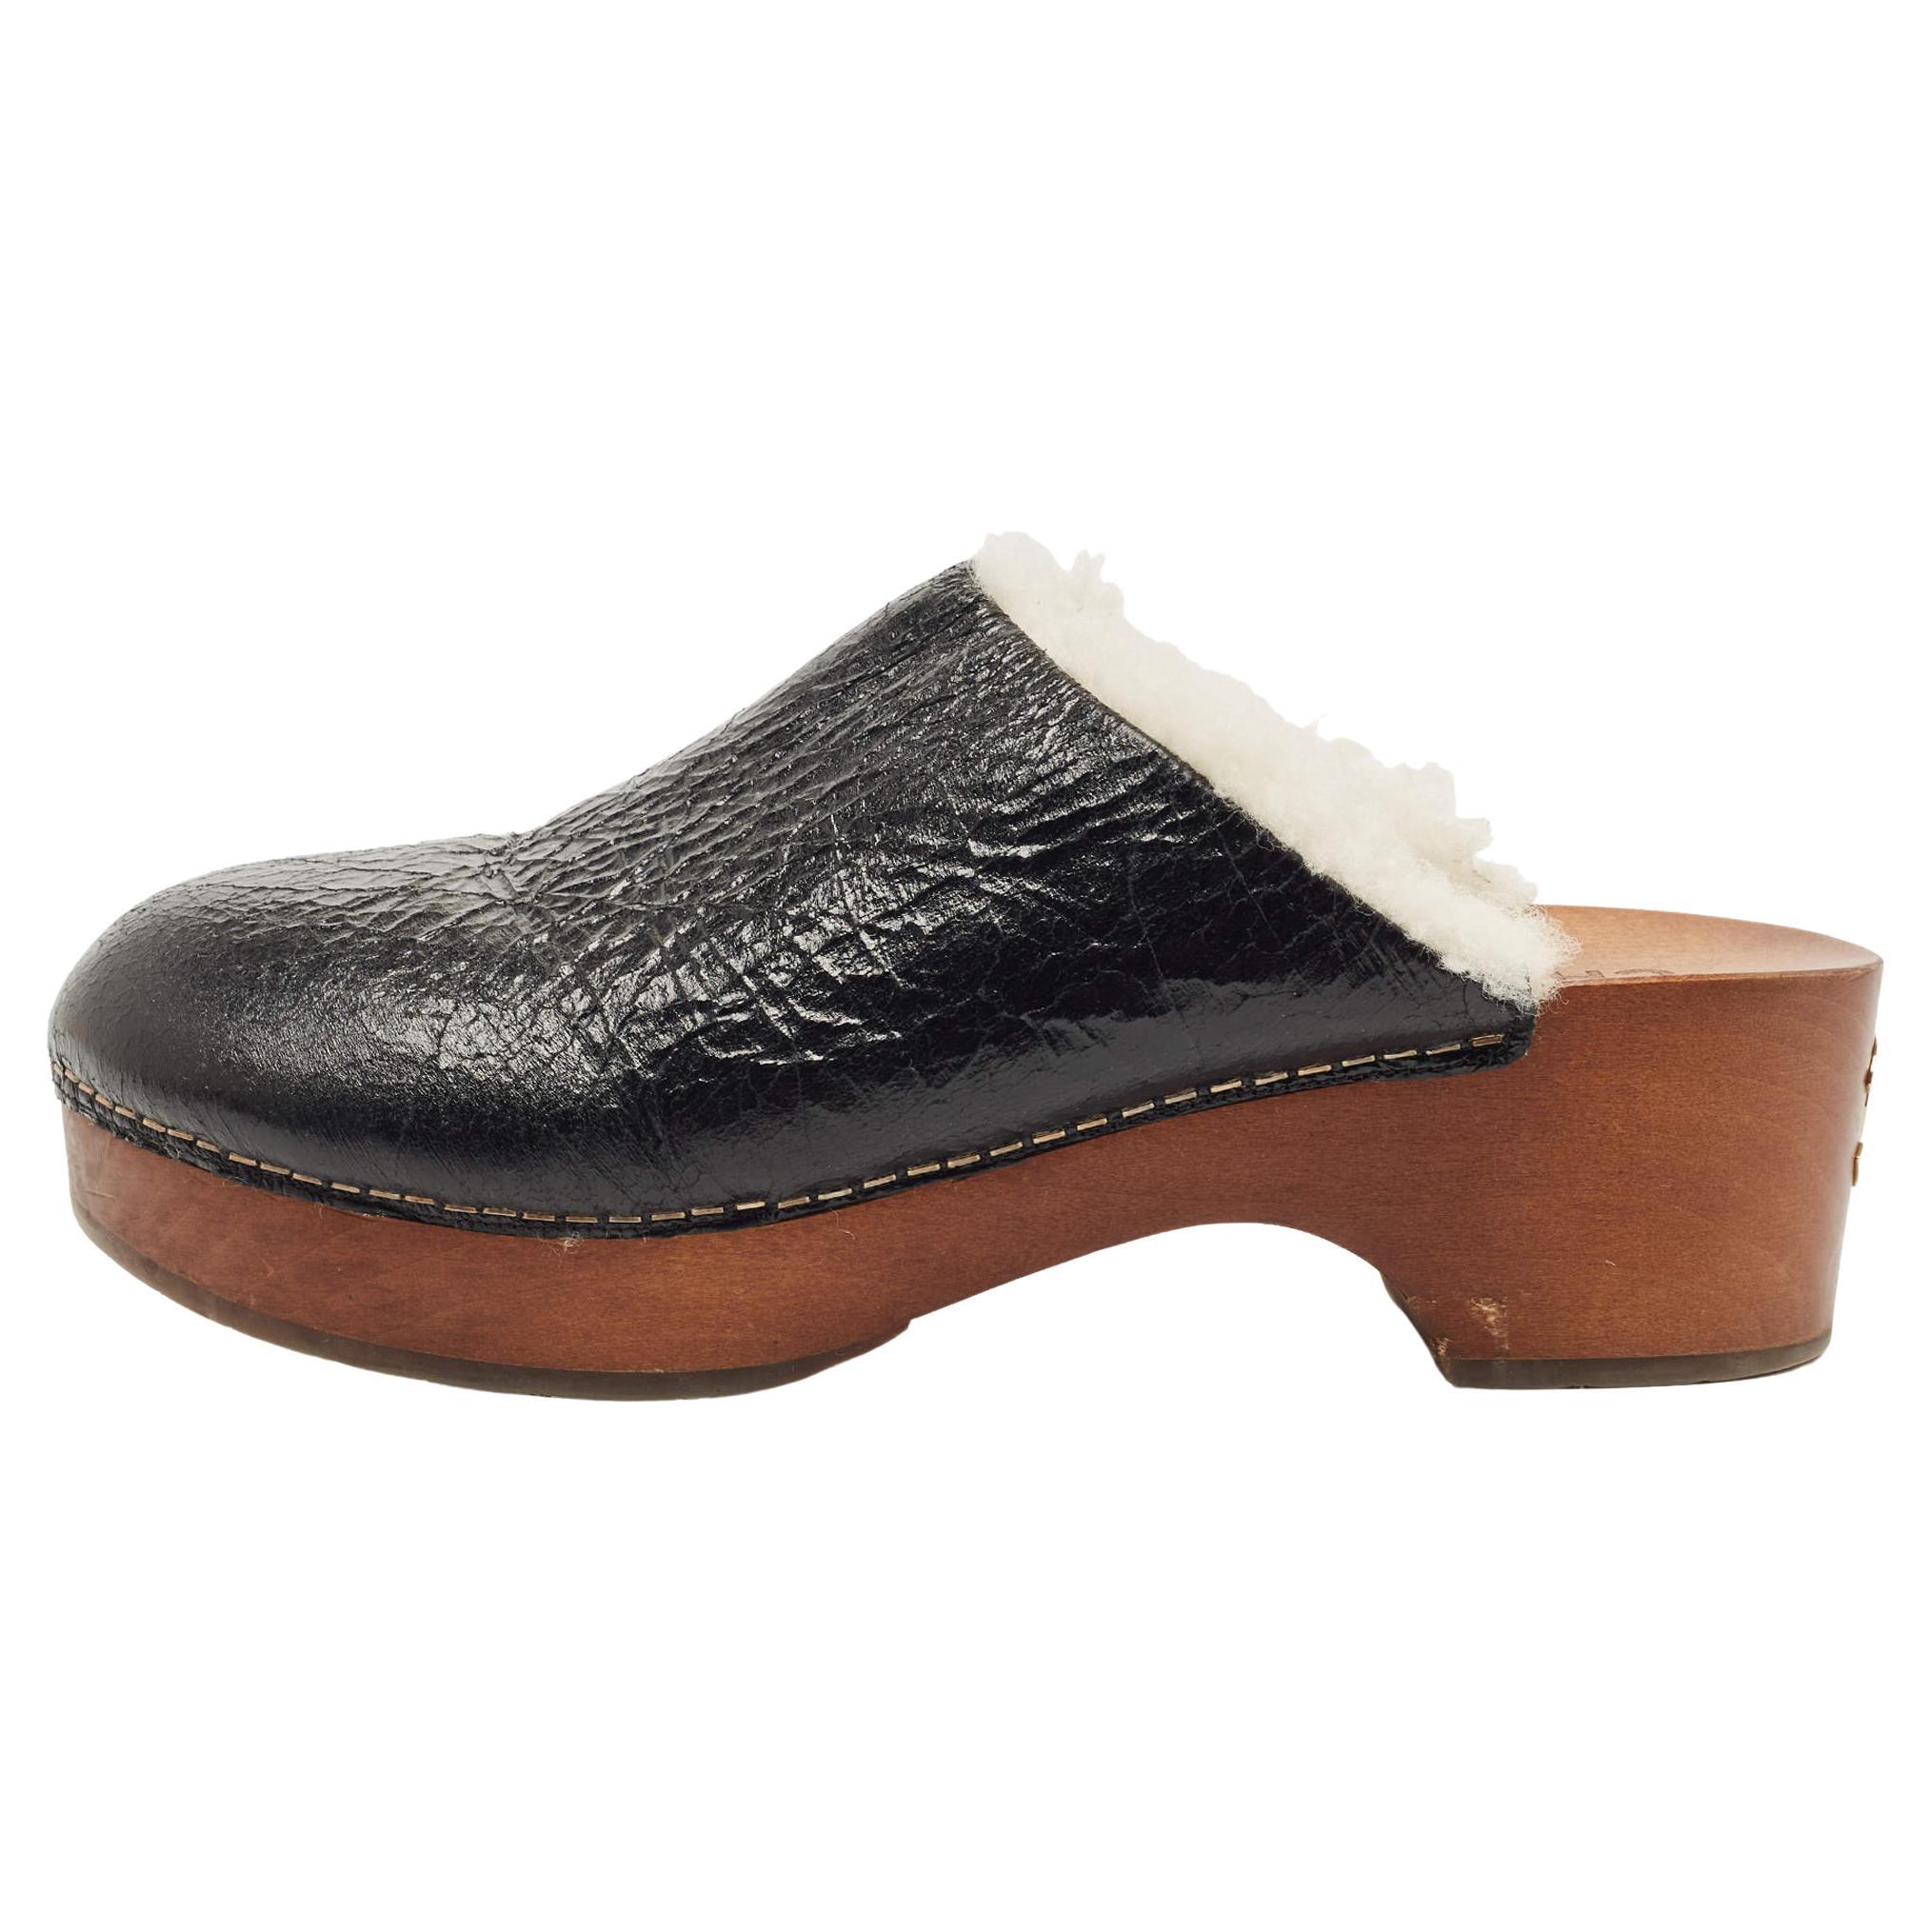 Chanel Black Leather and Fur Slip On Clogs Size 39